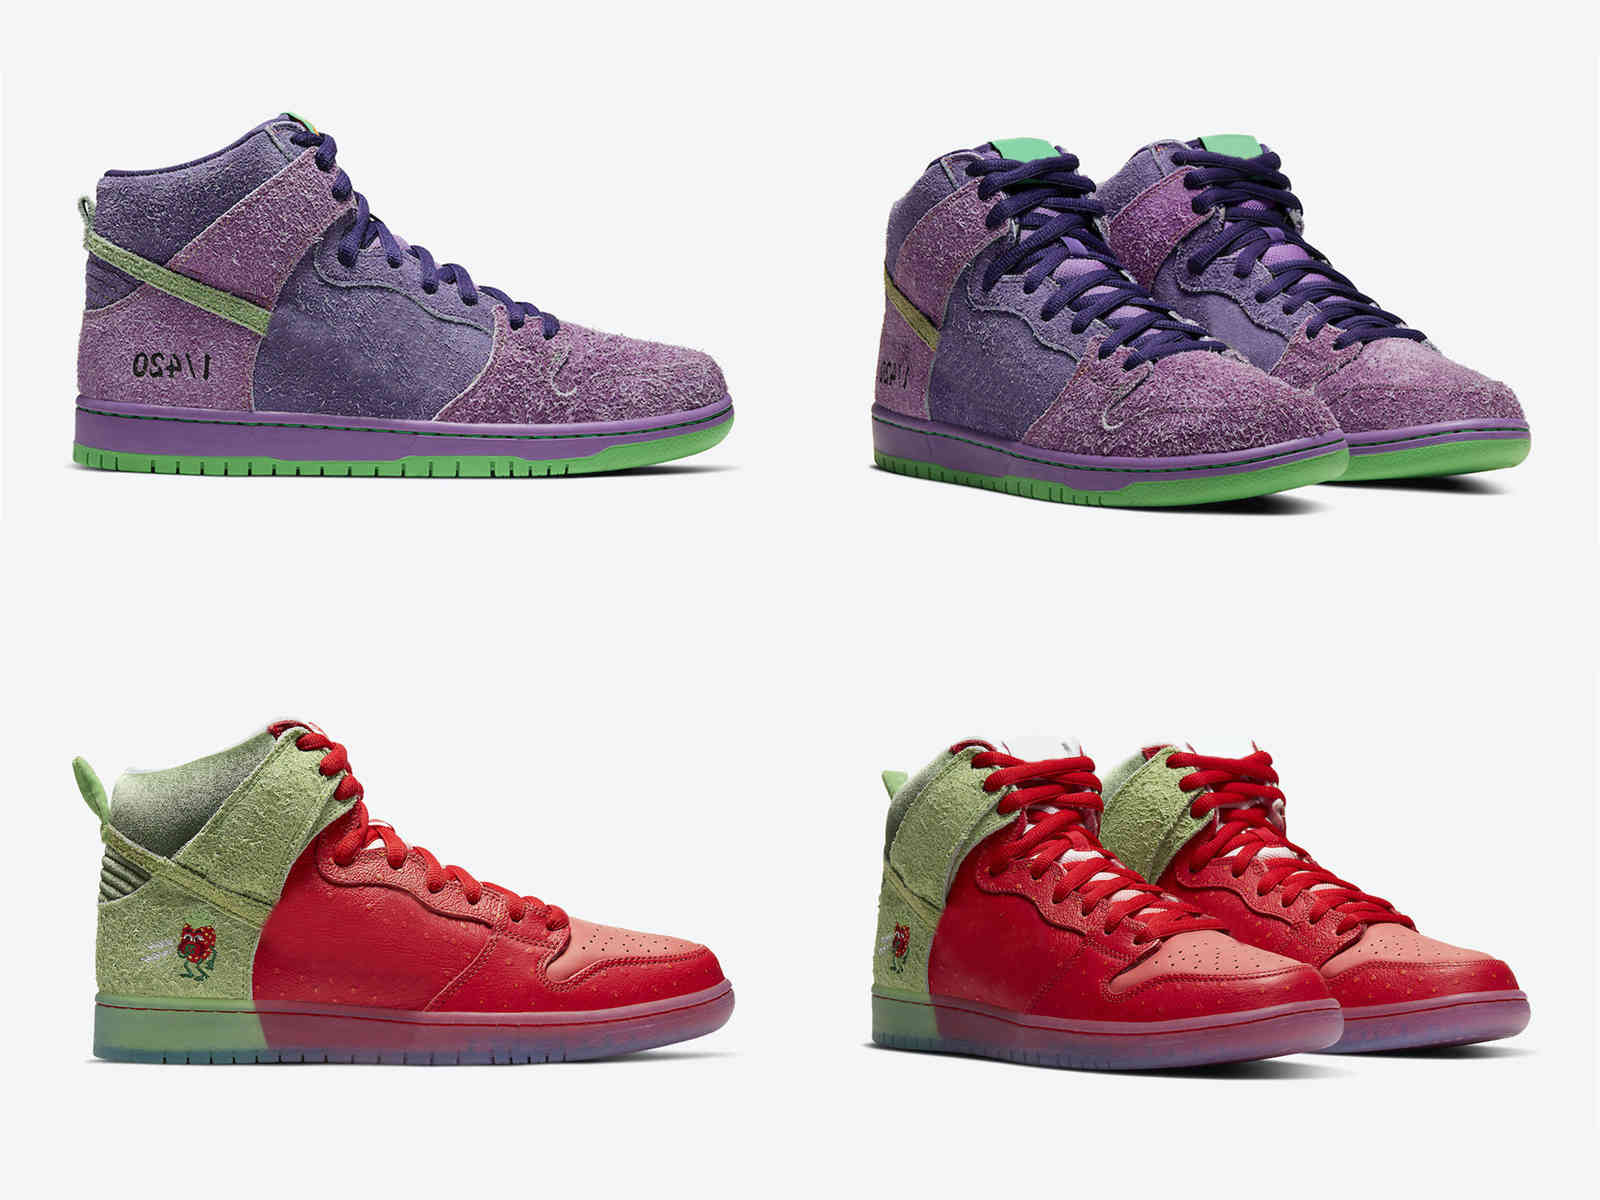 

Shoes Authentic Dunk High Pro SB Reverse Skunk Purple Strawberry Cough Men University Red Spinach Green Magic Ember Sneakers, Bubble wrap packaging